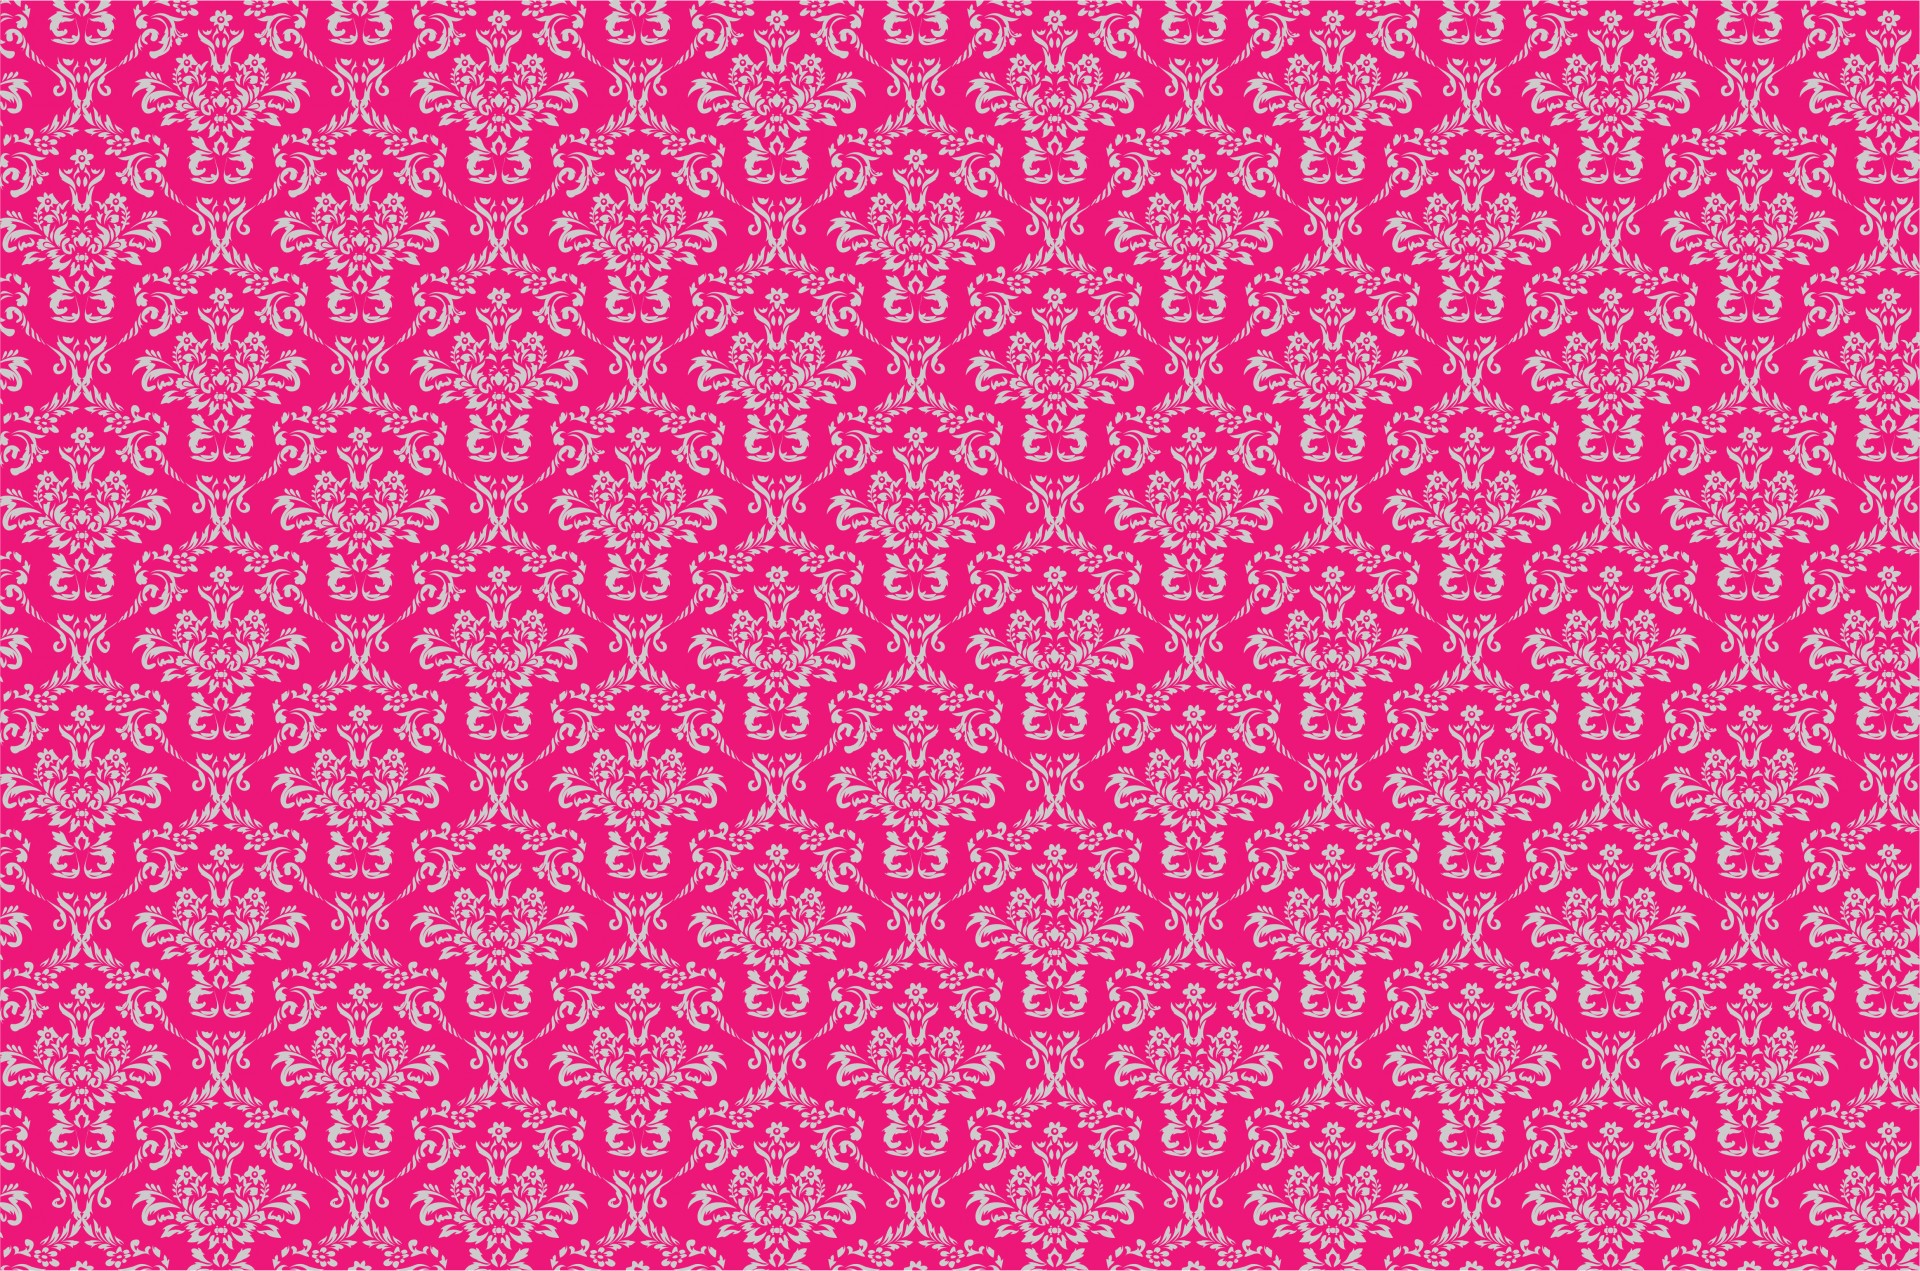 Damask pattern hot pink and gray wallpaper background